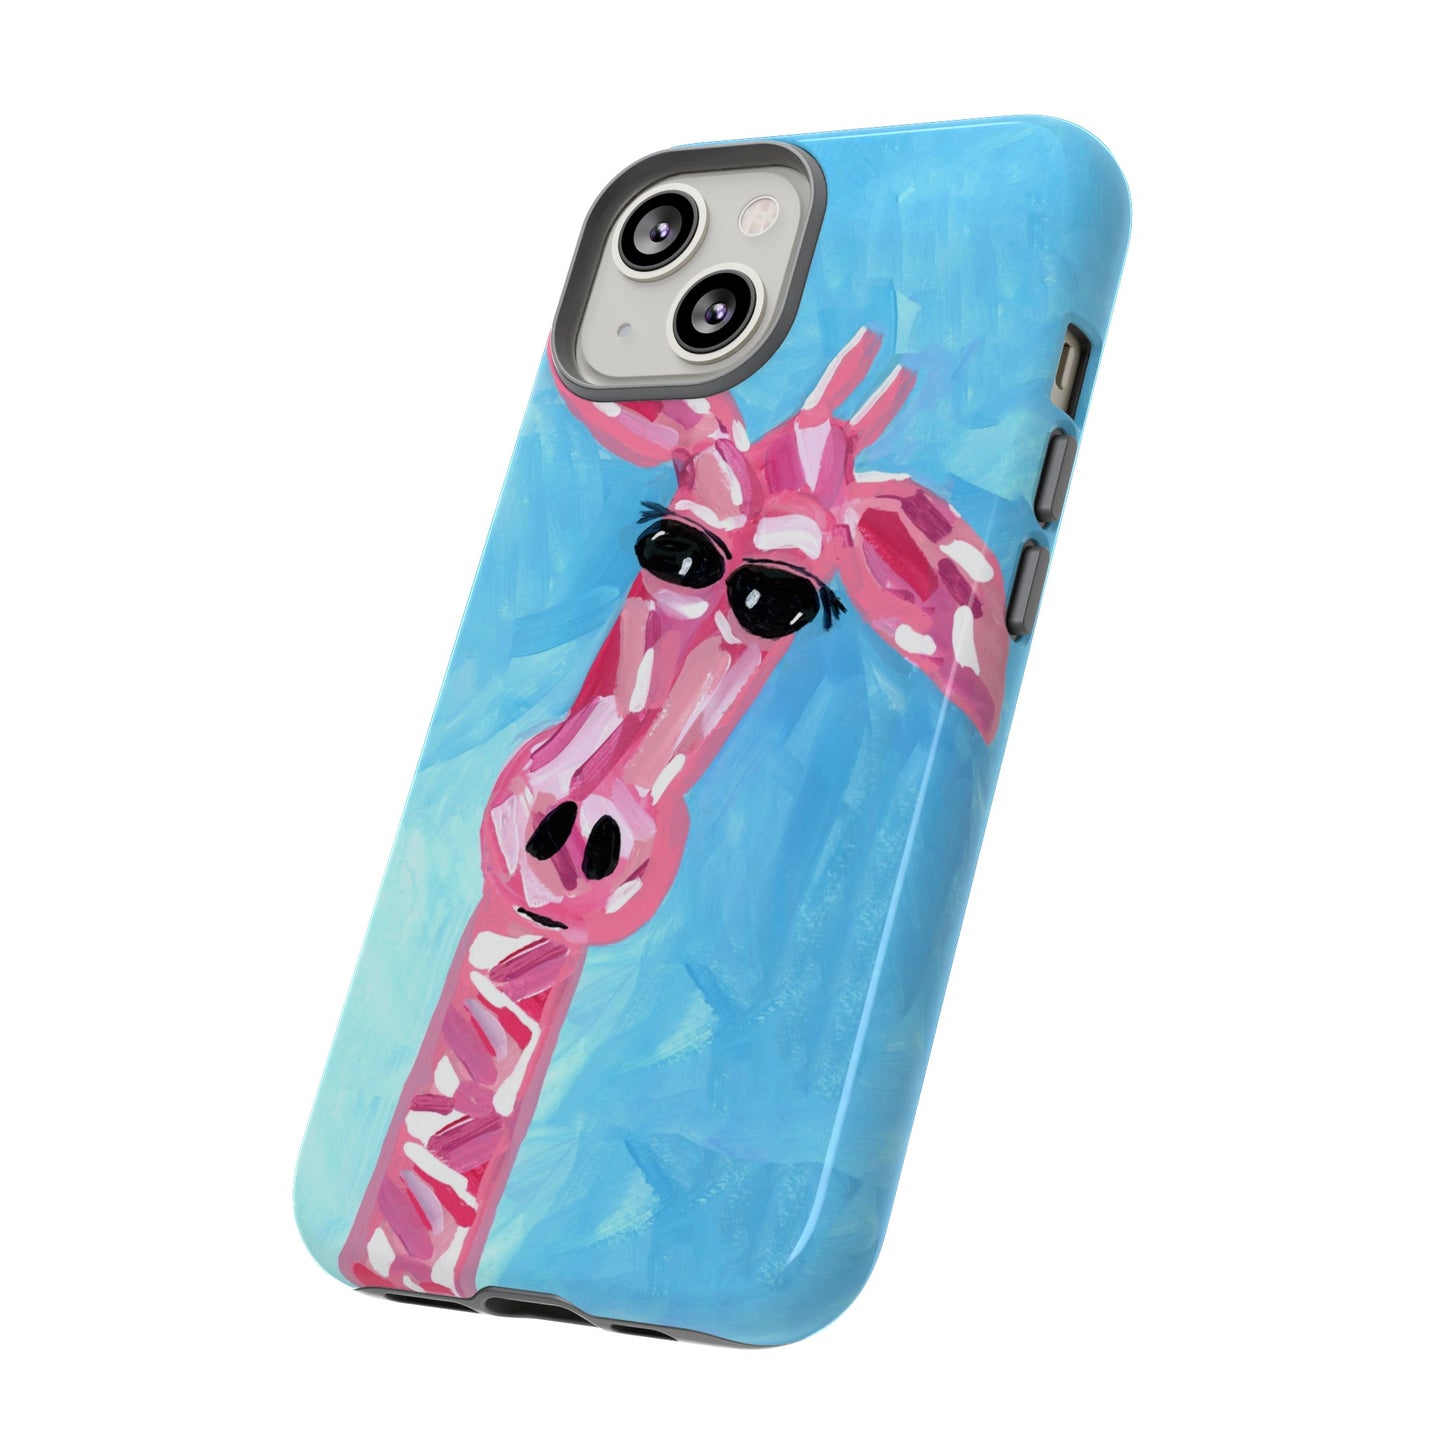 Bright Pink Giraffe Hand Painted Phone Case - Tough Cases